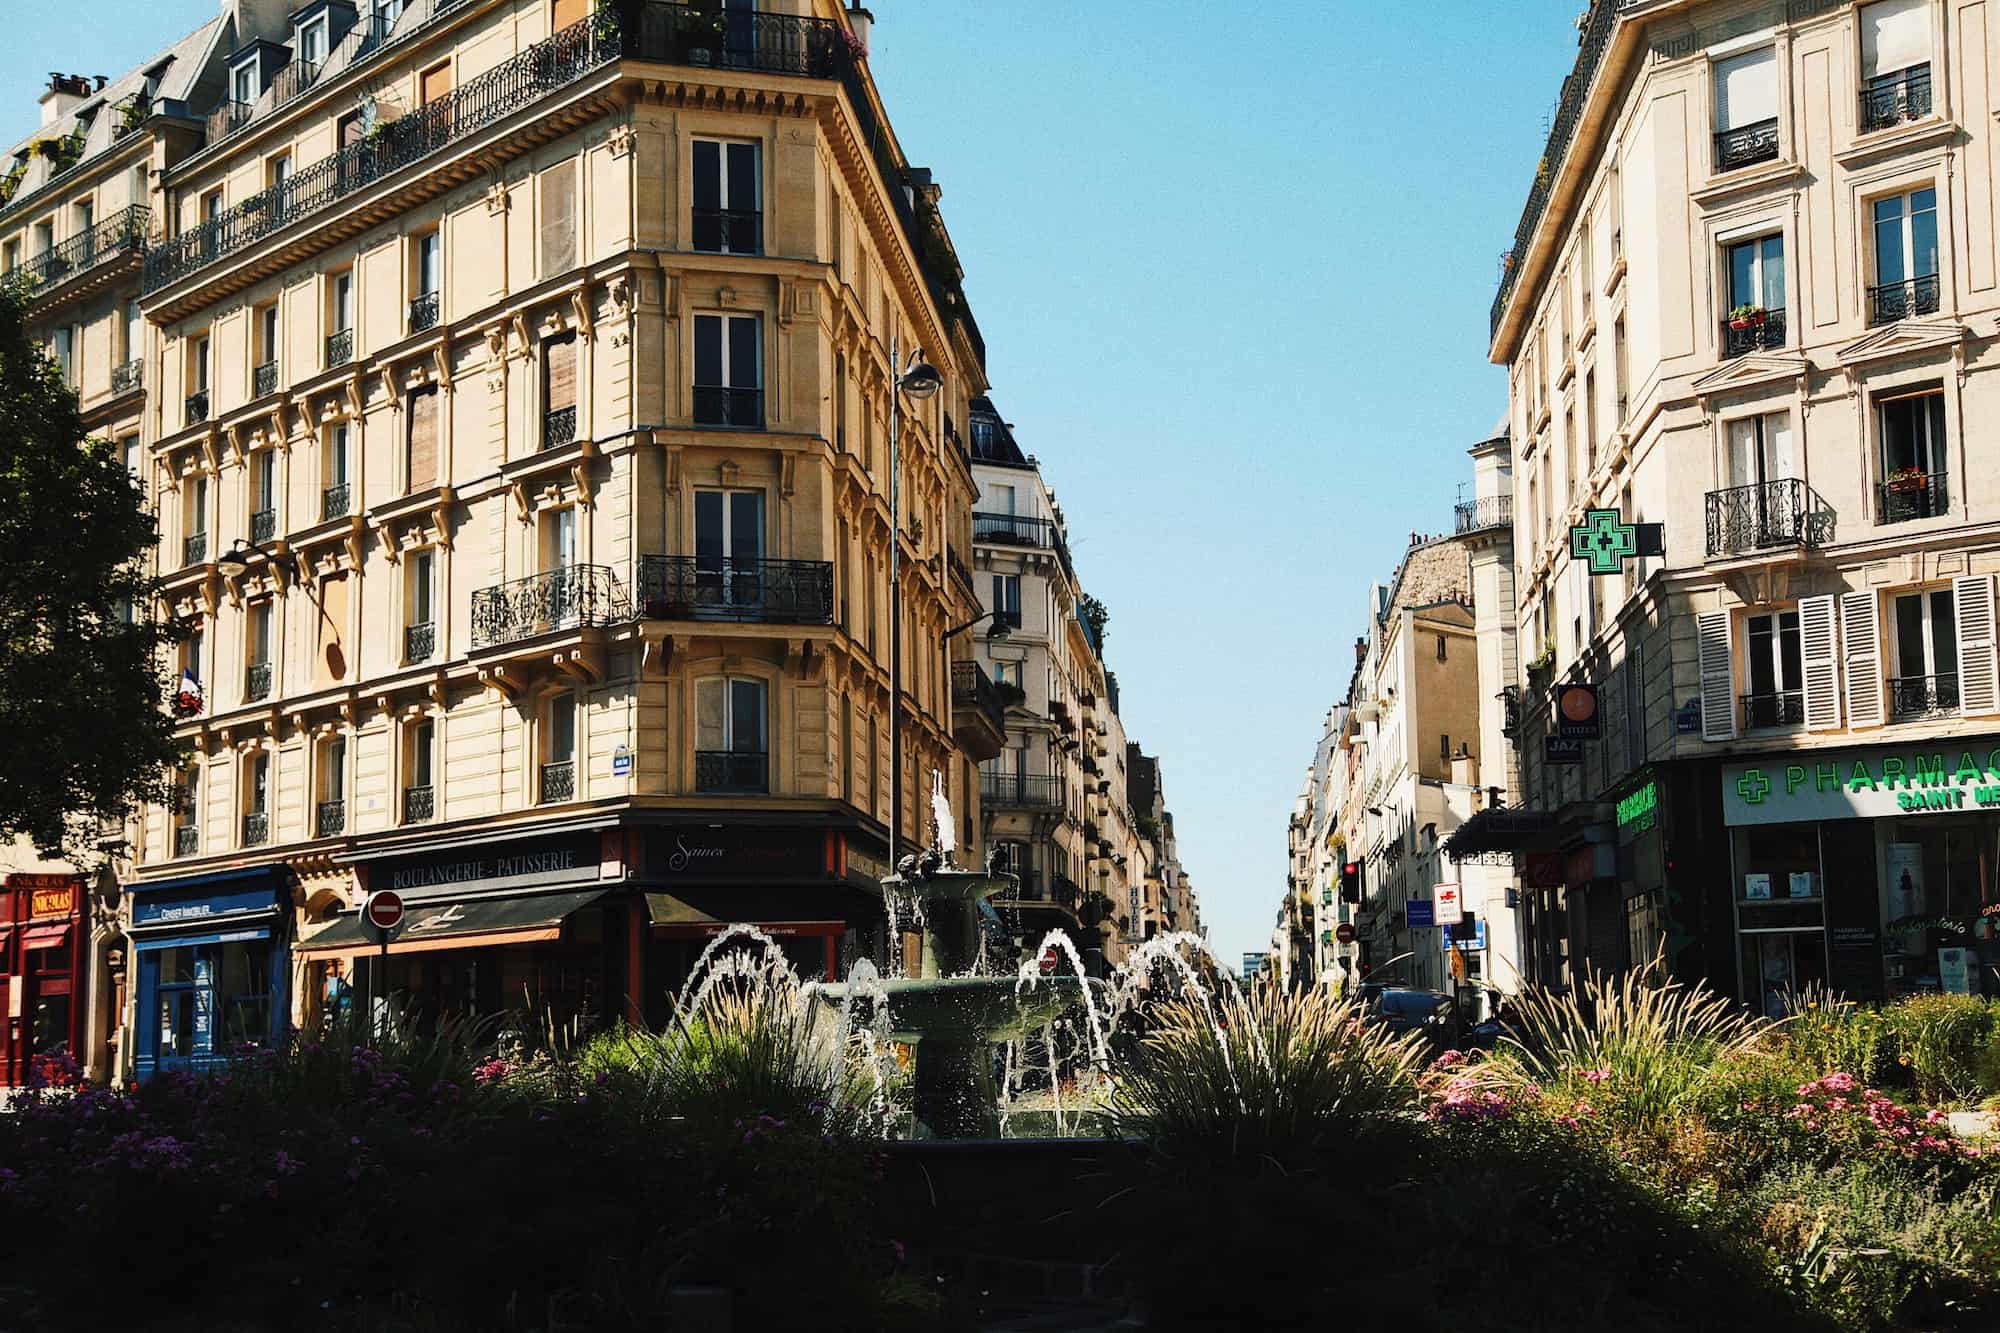 On a bright, sunny day, a fountain trickles in a Parisian square as the apartment buildings are bathed in sunlight. 